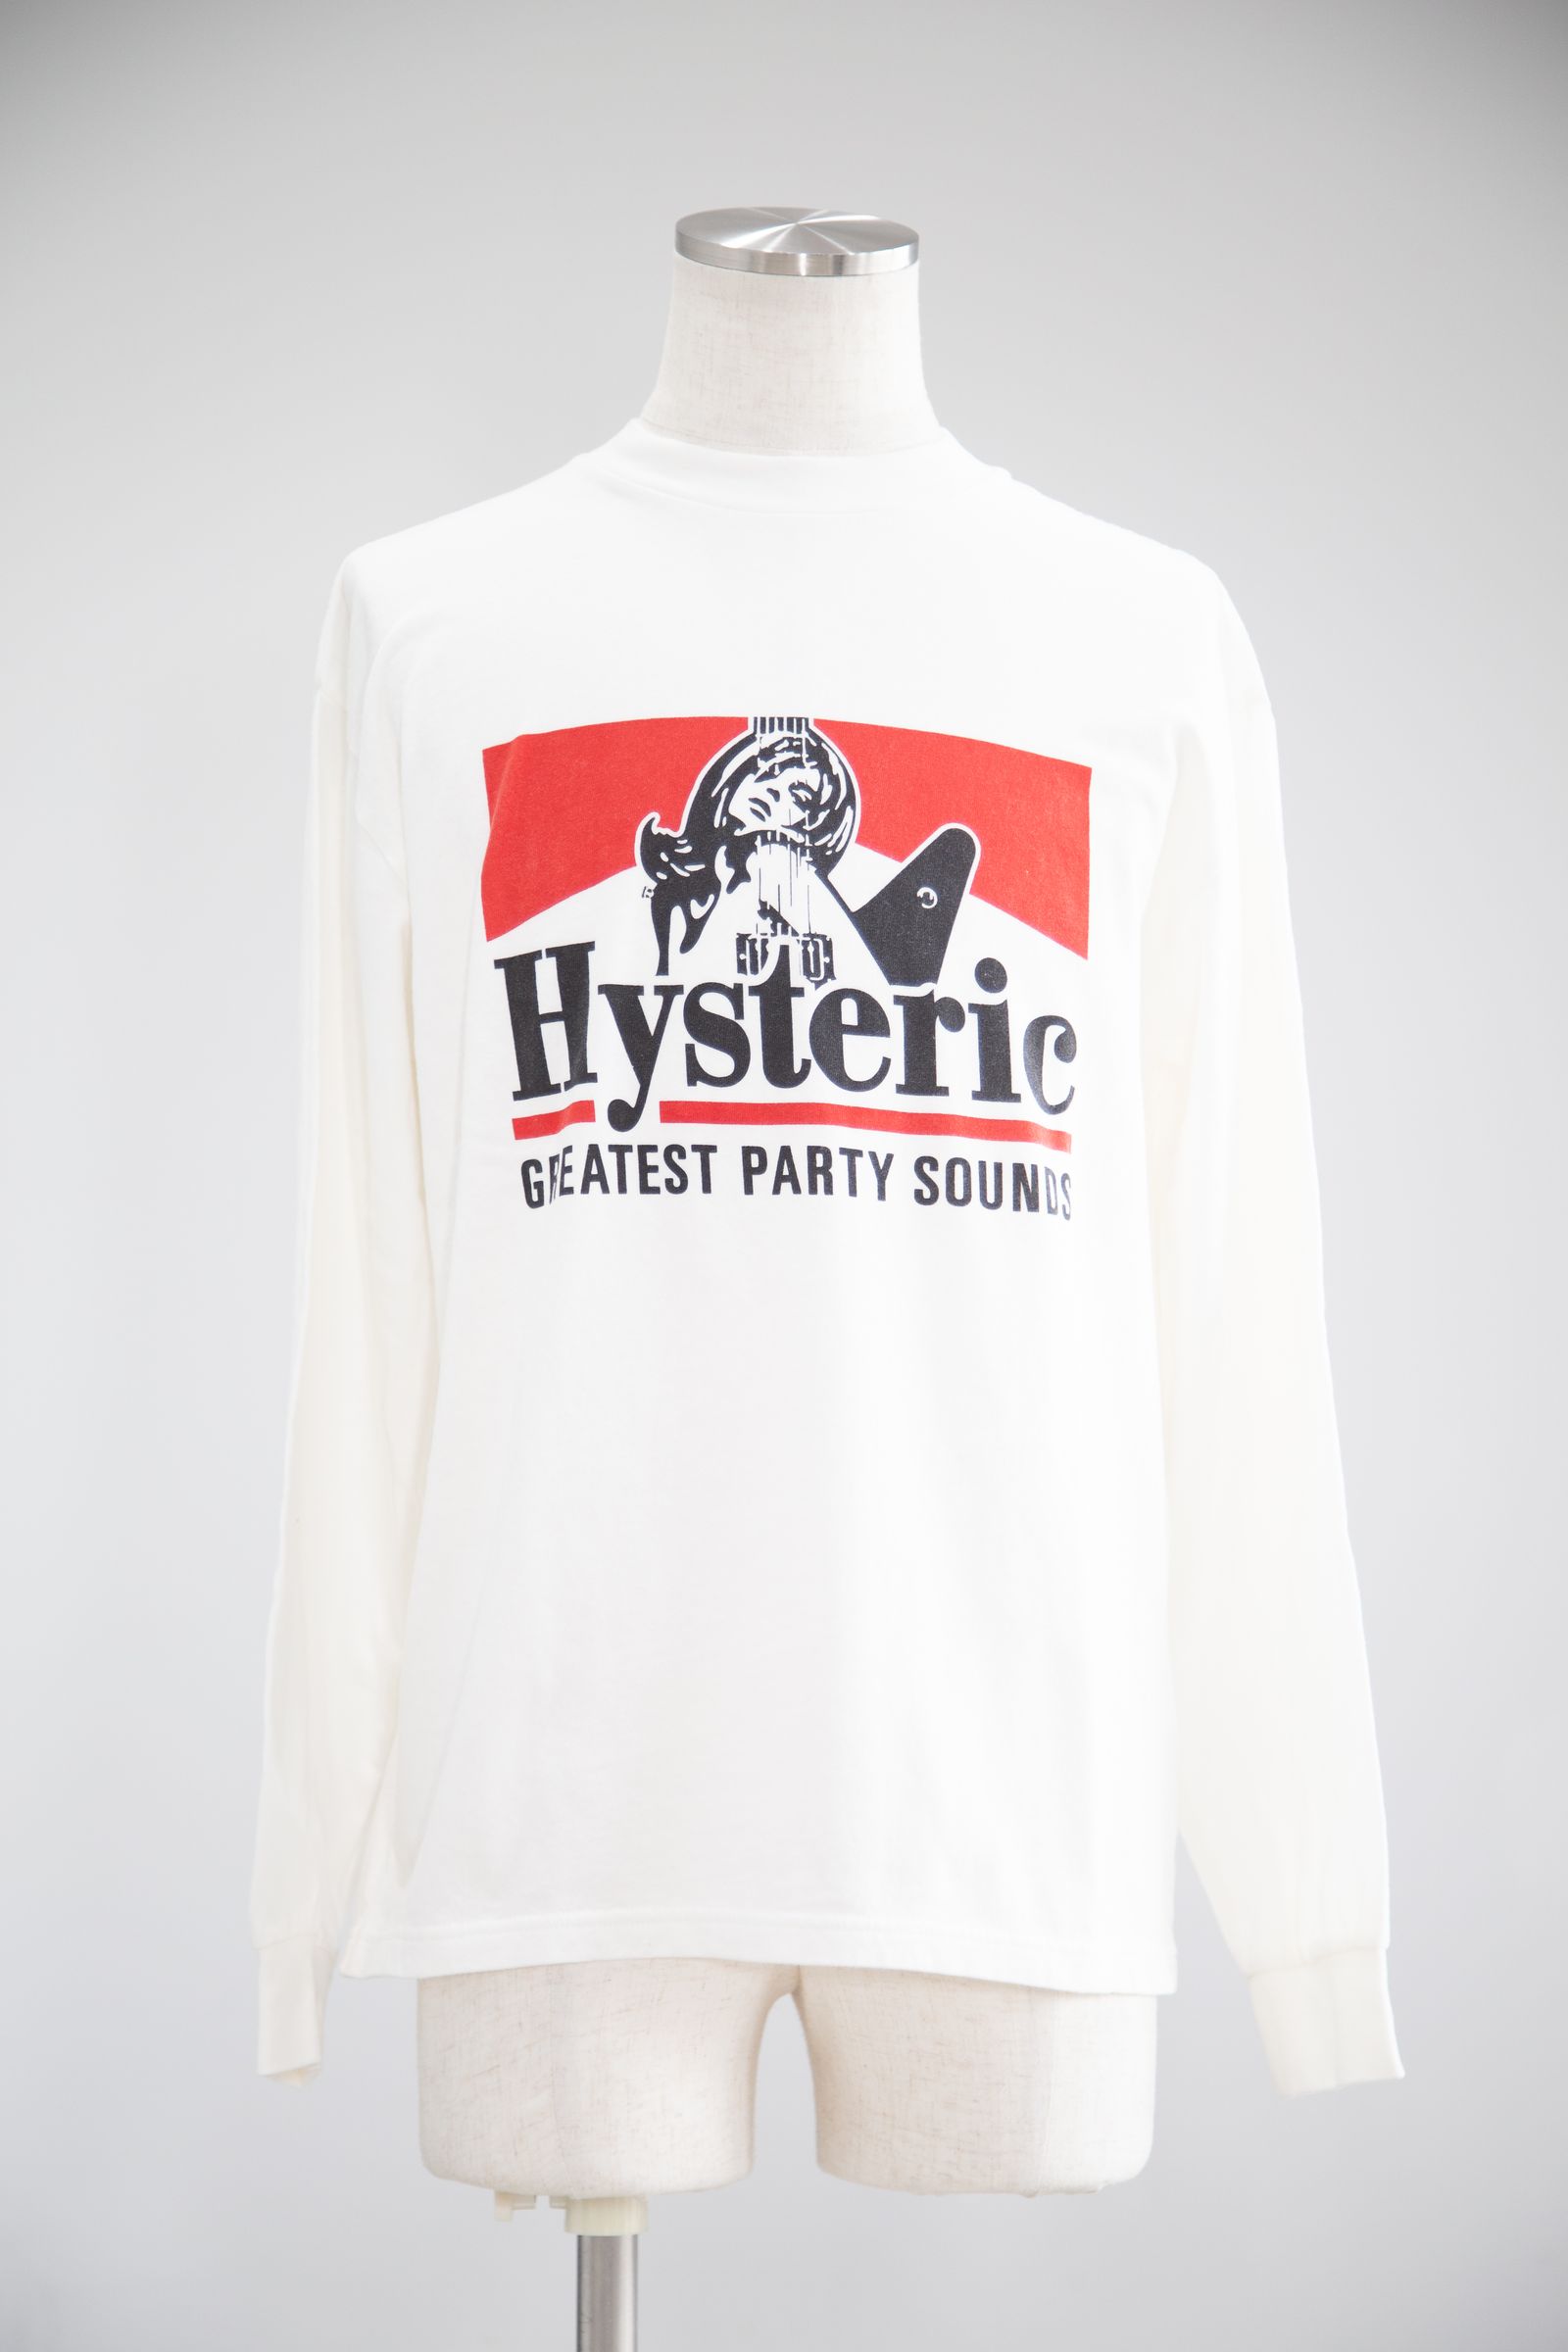 GREATEST PARTY SOUNDS Tシャツ / ホワイト - S